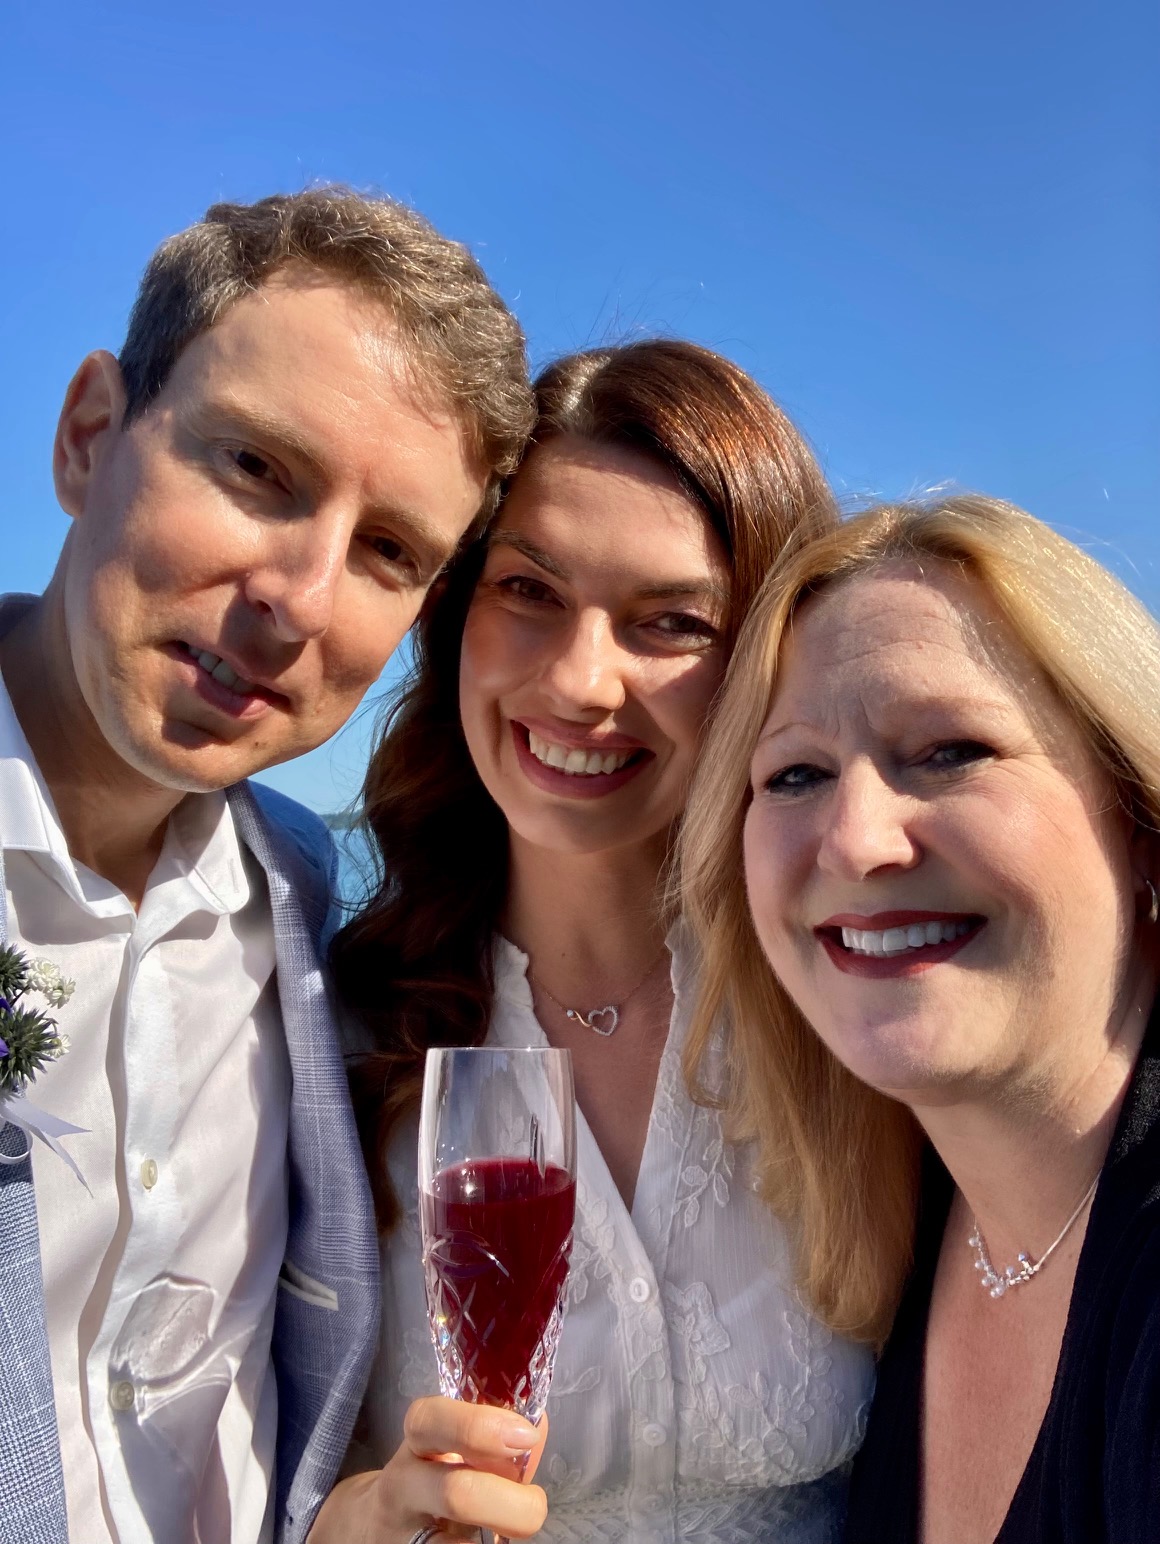 Selfie by Victoria wedding officiant Melinda with her happy couple